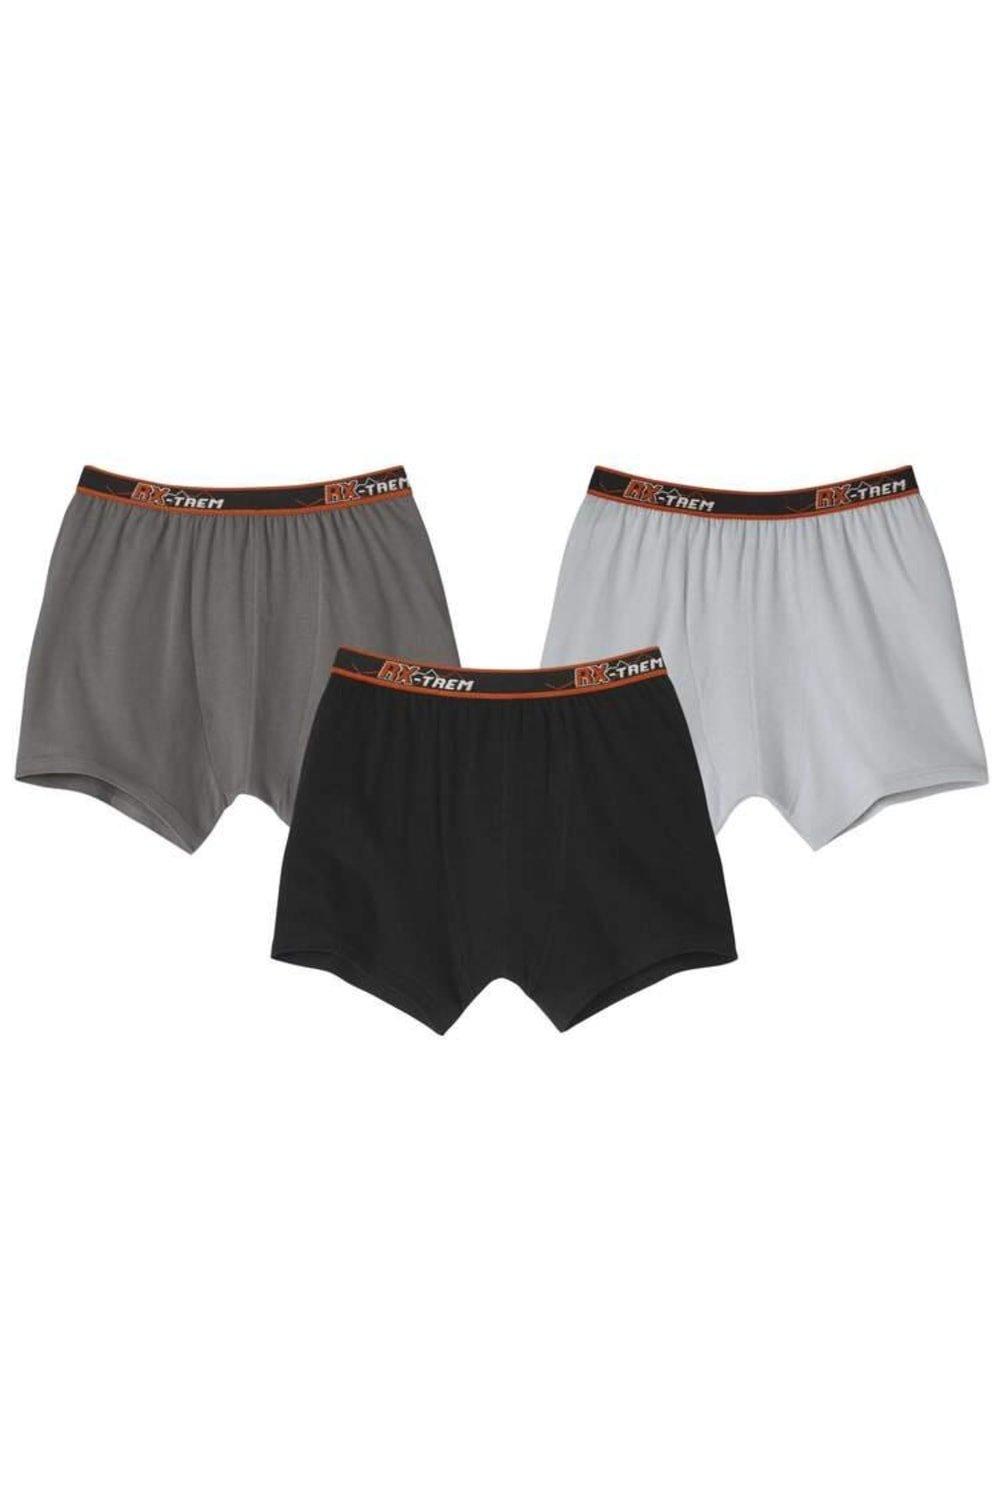 Stretch Boxer Shorts (Pack of 3)